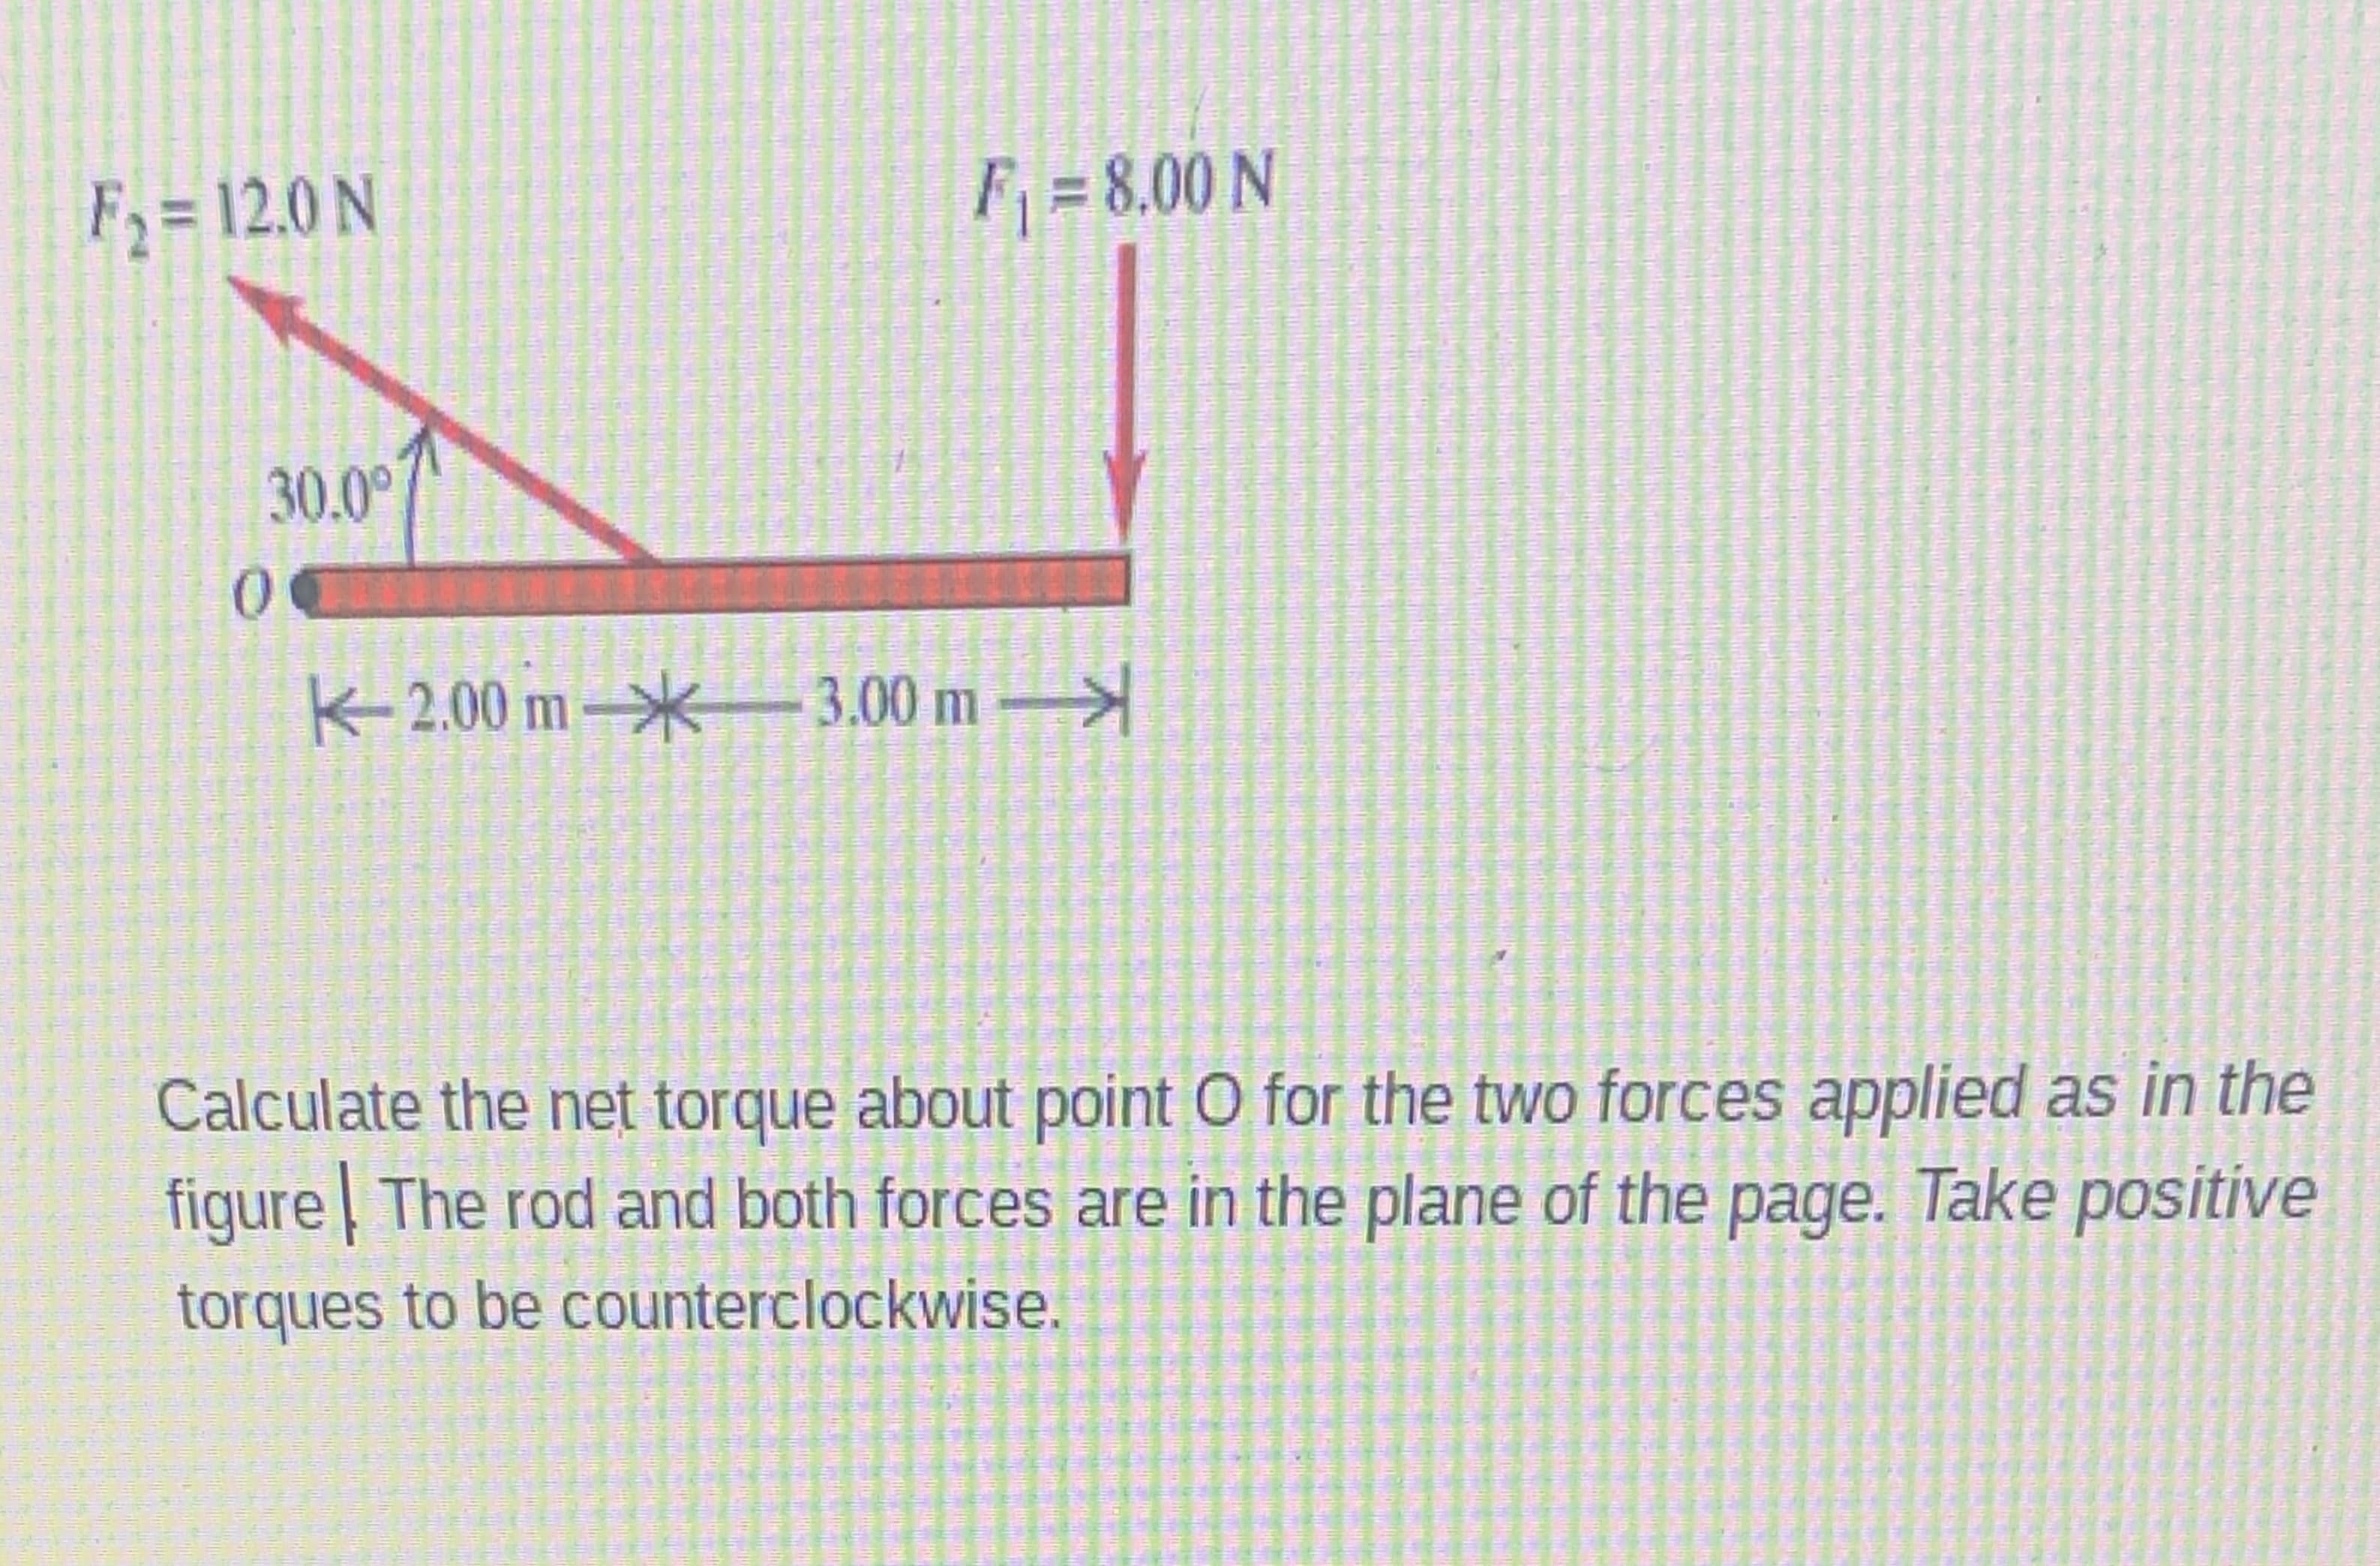 Calculate the net torque about point O for the two forces applied as in the
figure The rod and both forces are in the plane of the
page. Take positive
torques to be counterclockwise.
